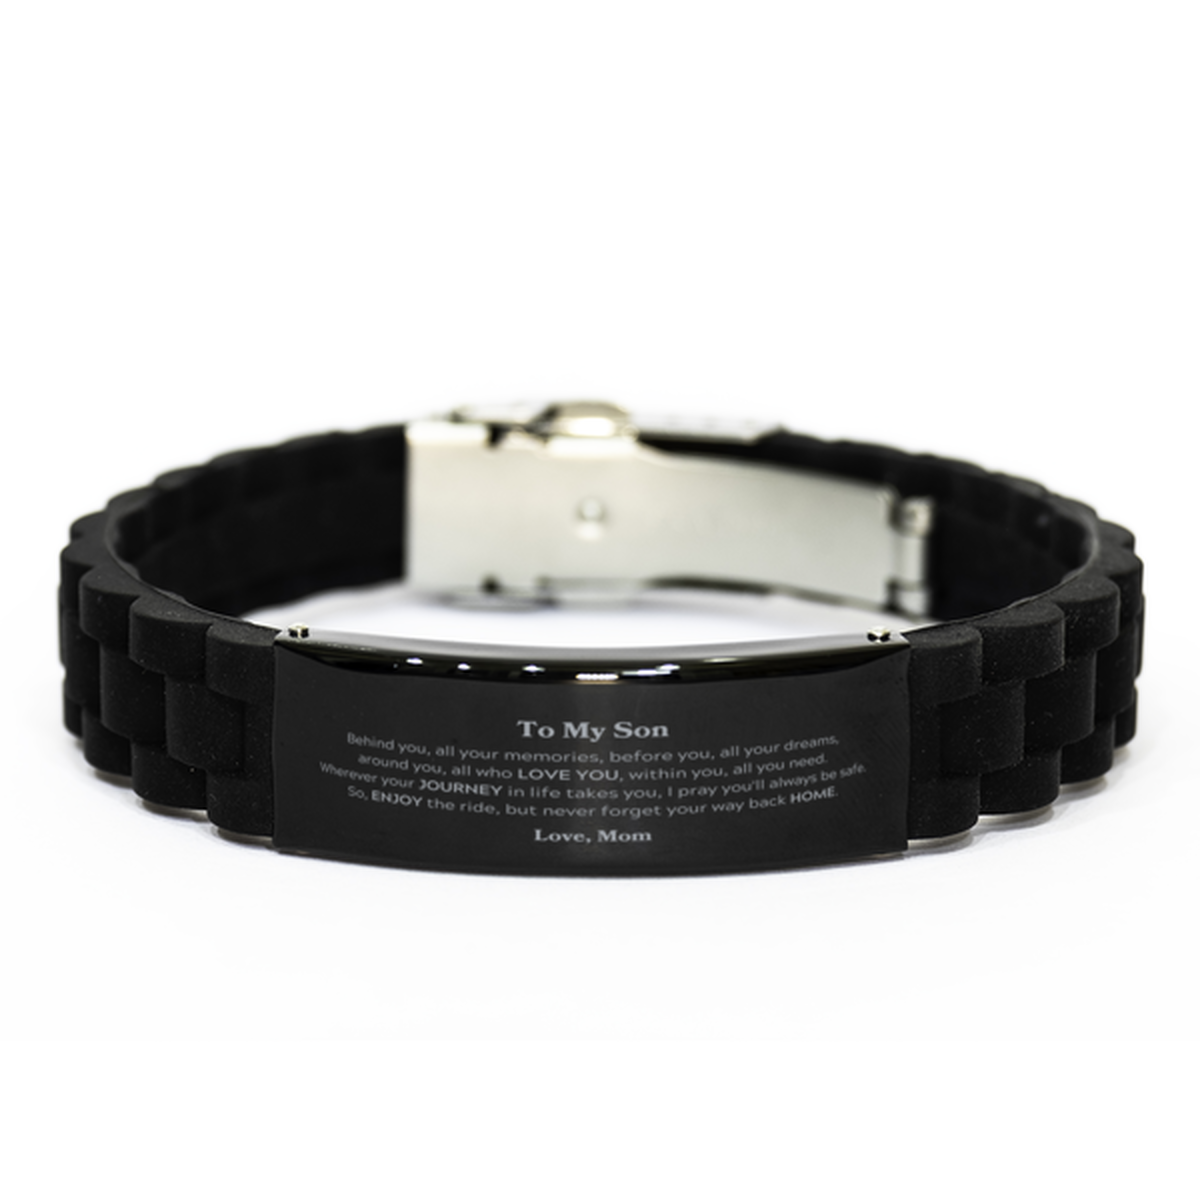 To My Son Graduation Gifts from Mom, Son Black Glidelock Clasp Bracelet Christmas Birthday Gifts for Son Behind you, all your memories, before you, all your dreams. Love, Mom